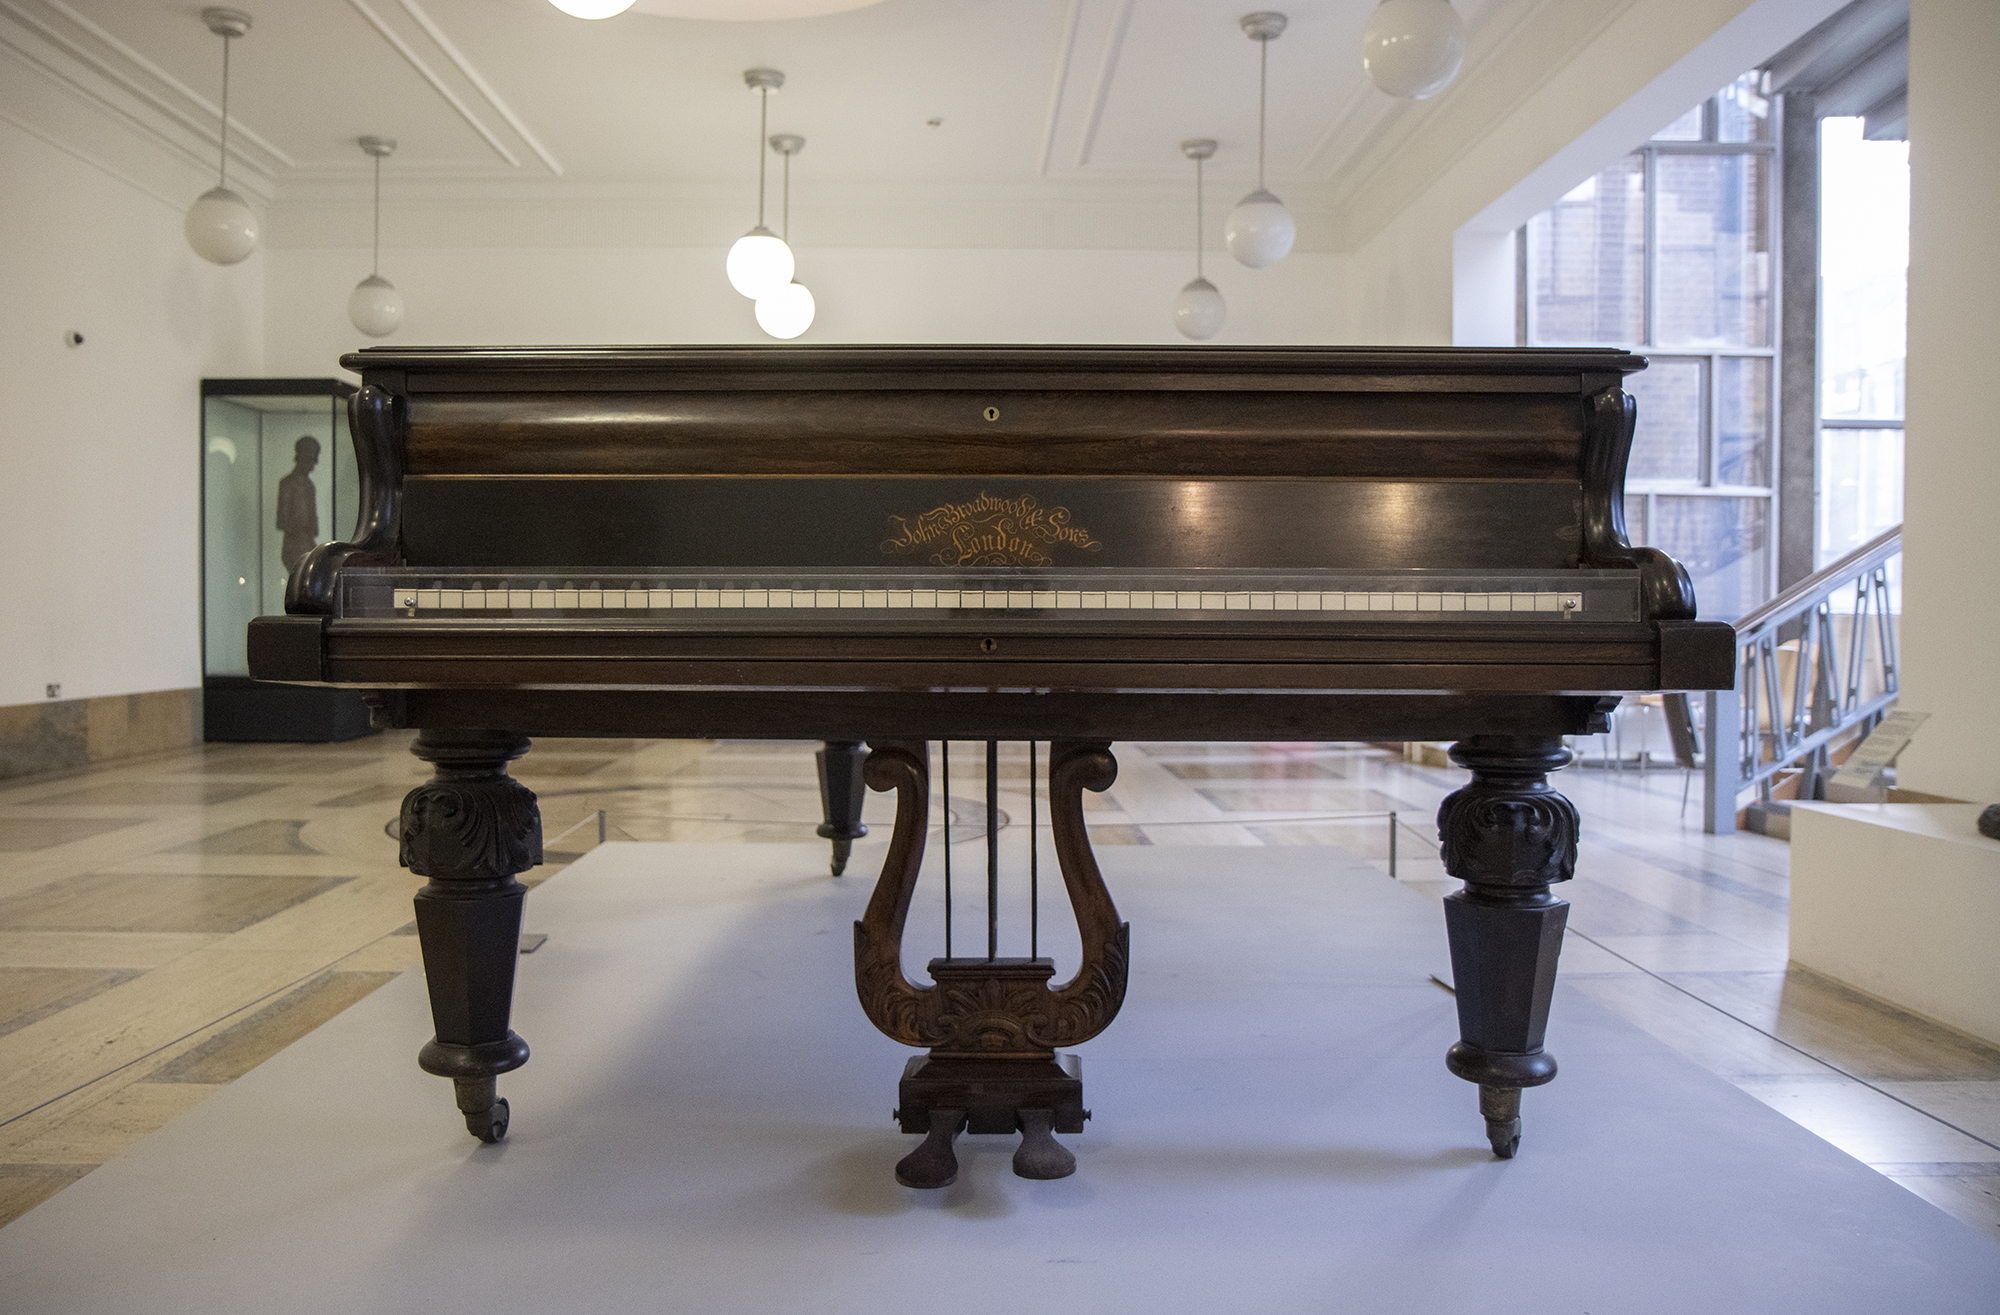 Front view of George Eliot's piano on display in the Herbert Art Gallery & Museum